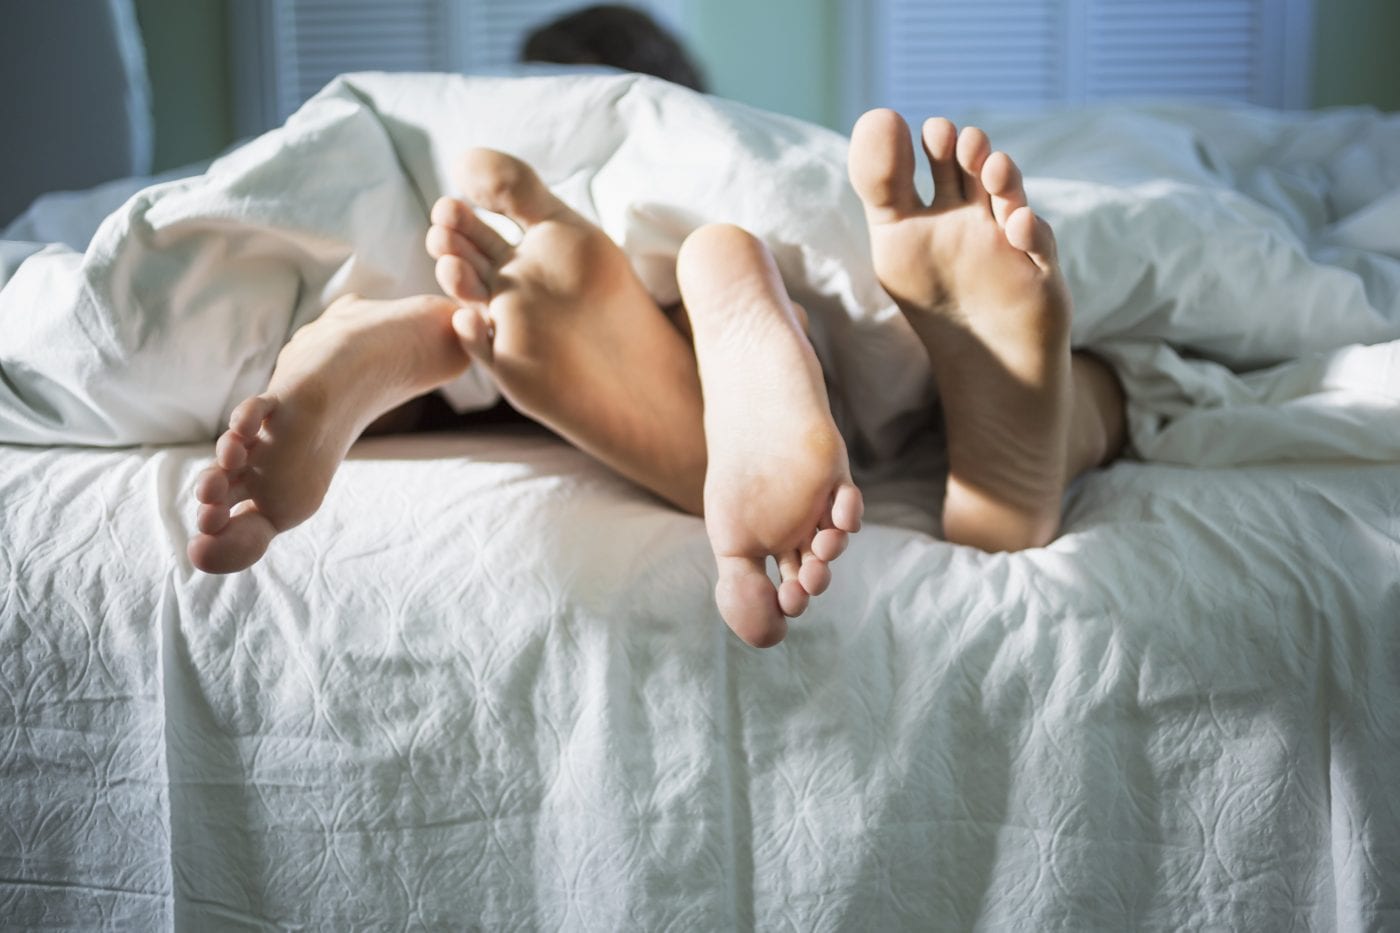 9 Things You Should Always Do Before Having Sex